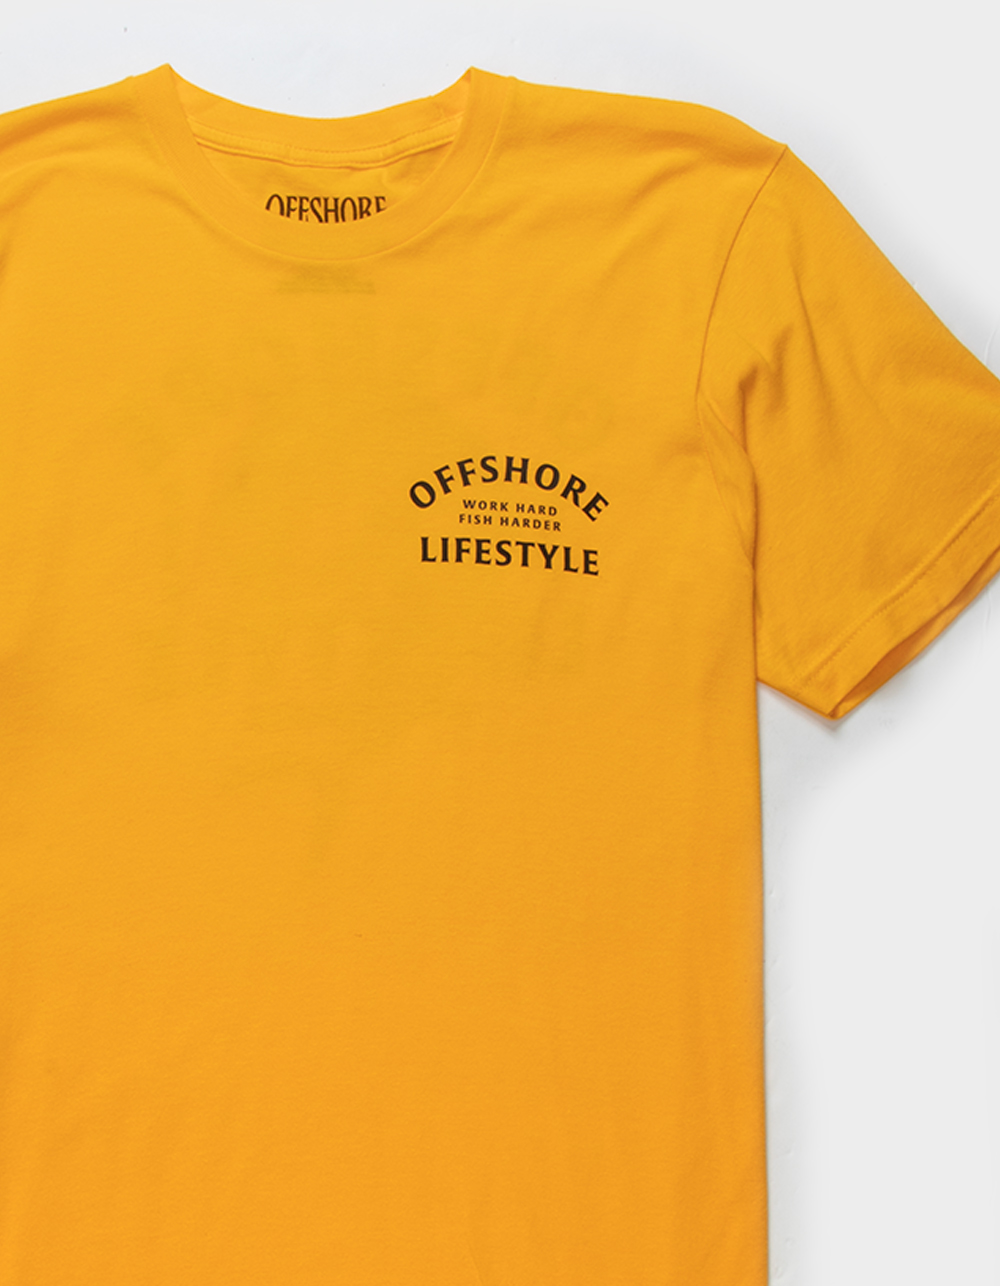 Offshore Lifestyle Pacific Tee - Yellow - Large